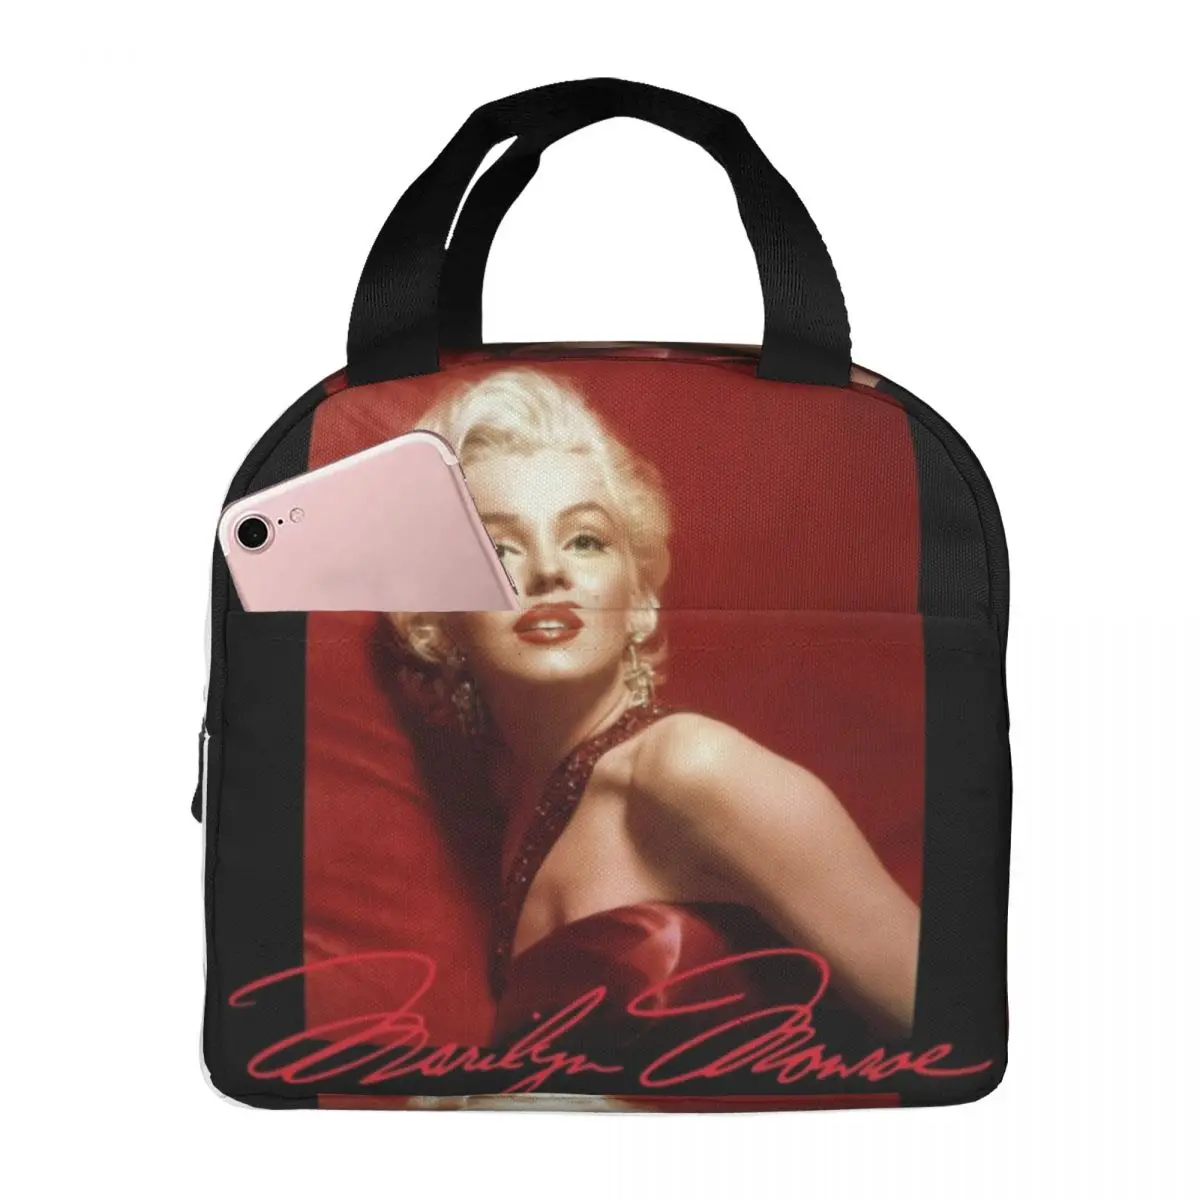 

Marilyn Monroe Fan Art Merch Thermal Insulated Lunch Bag Insulated bento bag Meal Container Bento Pouch Portable Tote Lunch